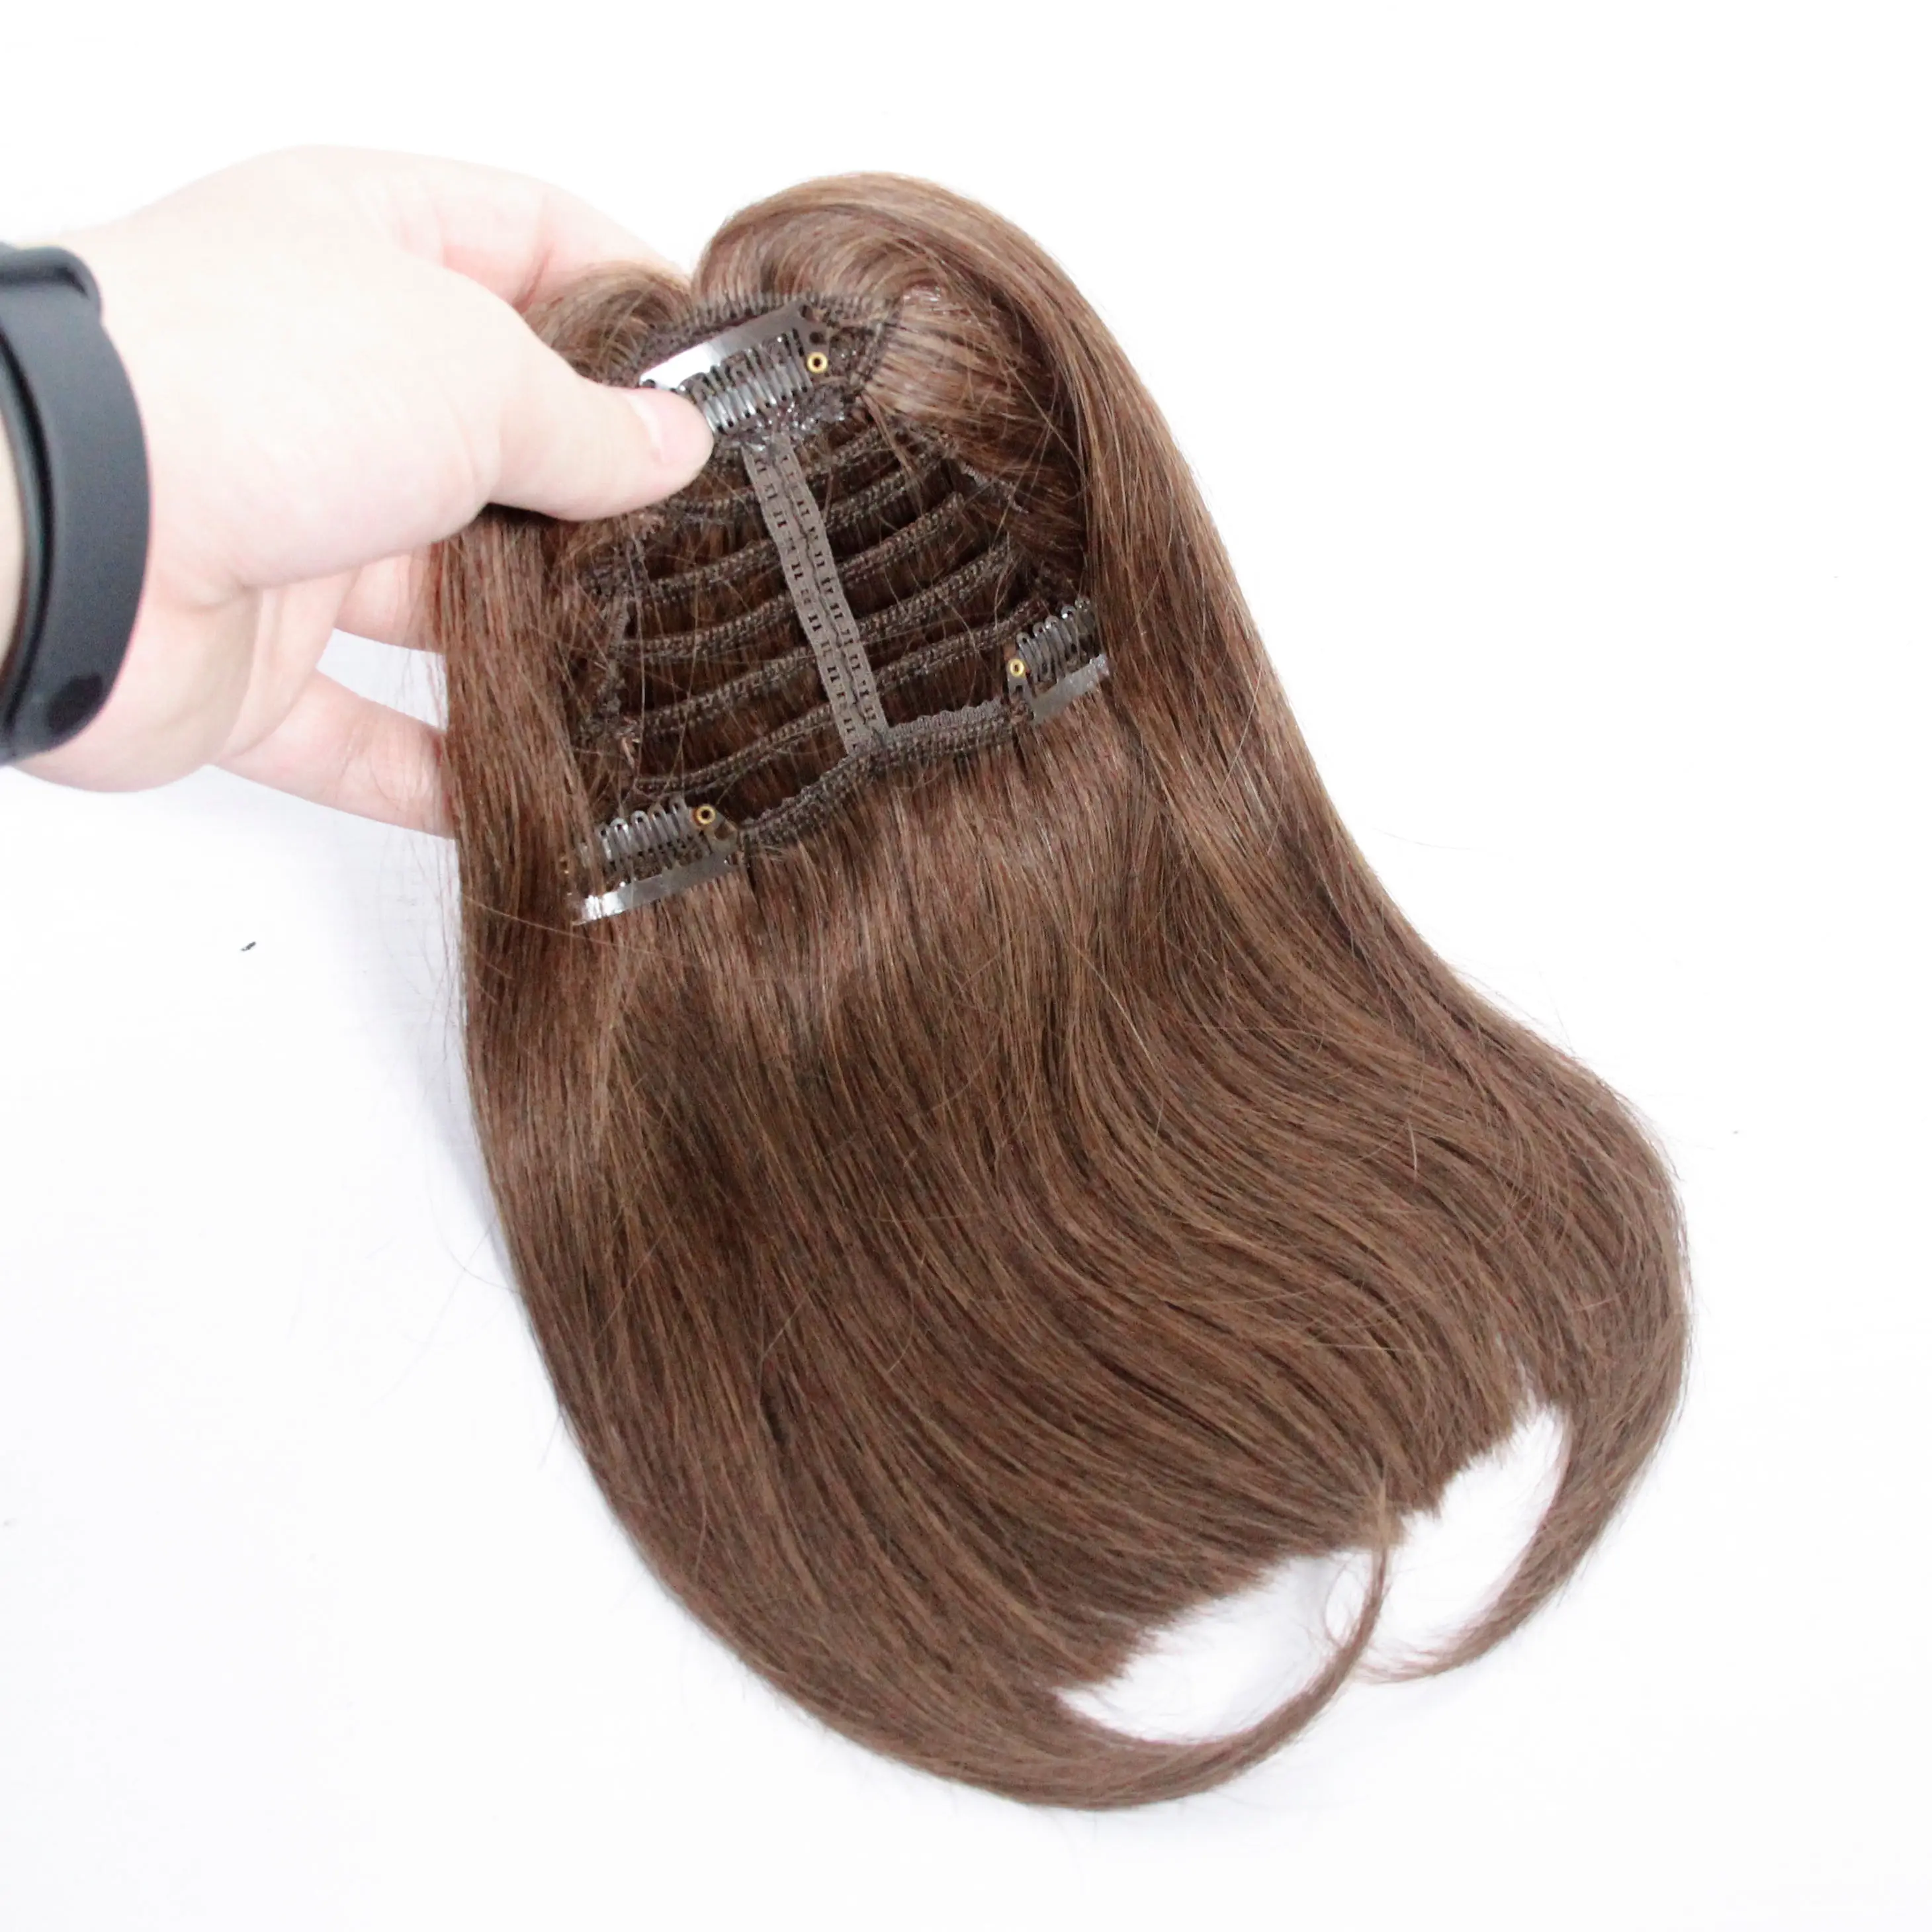 TOP quality cheap Clip in Bang Hair weaving, no shedding remy clip human hair extension for black women